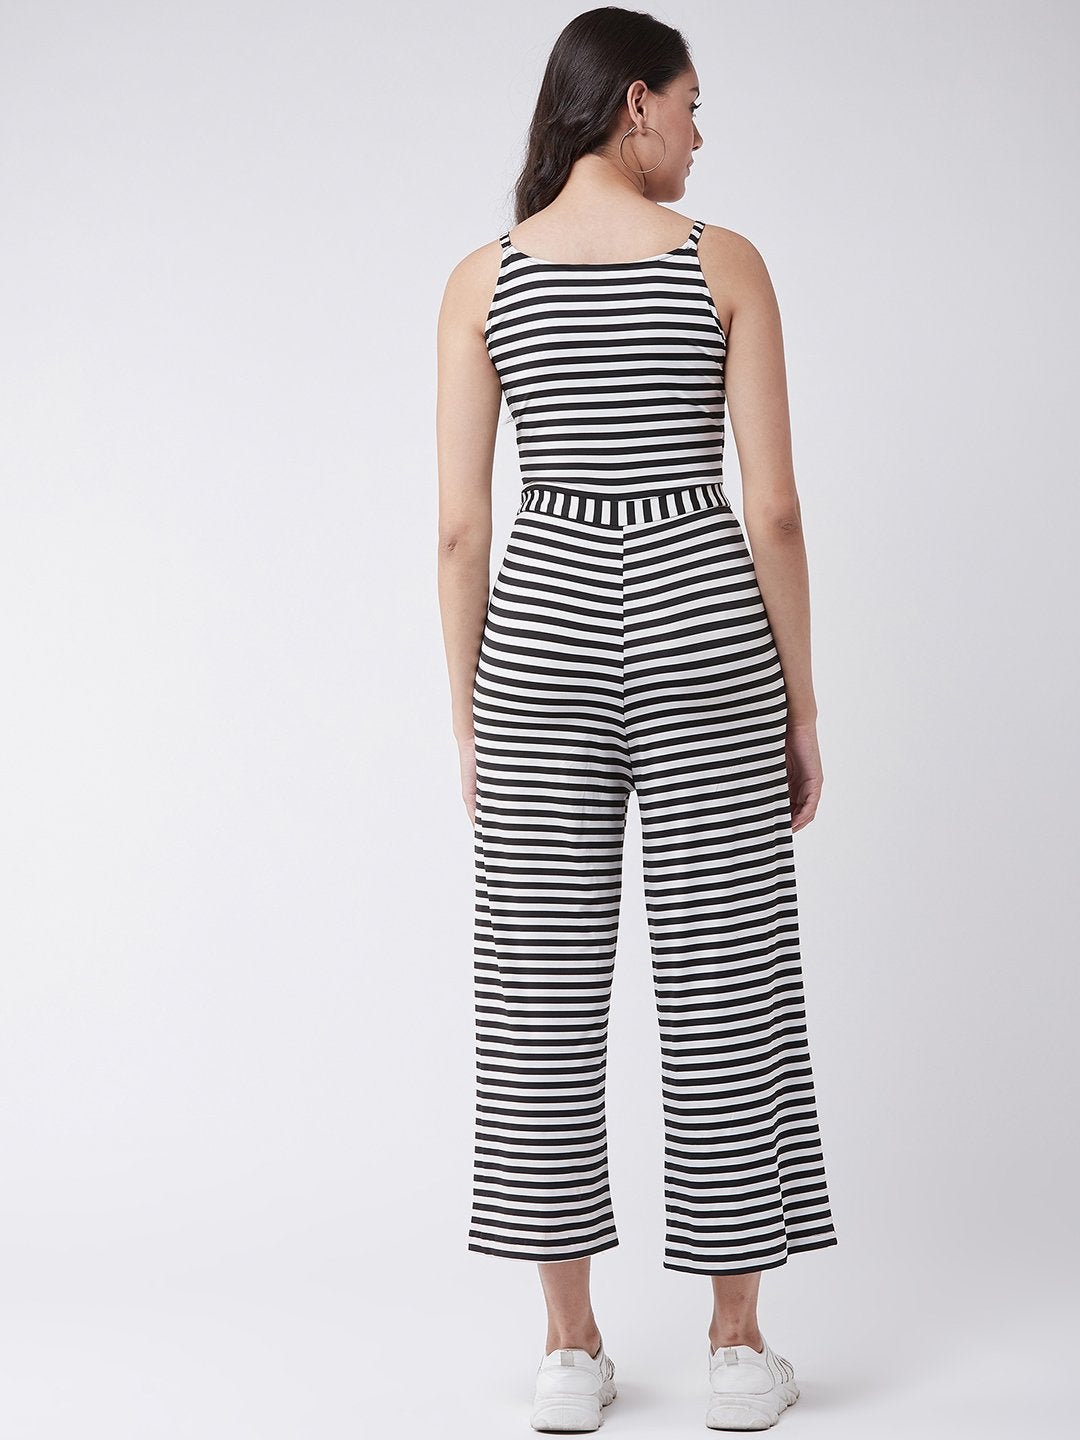 Women's Knitted Stripes Strappy Jumpsuit - Pannkh